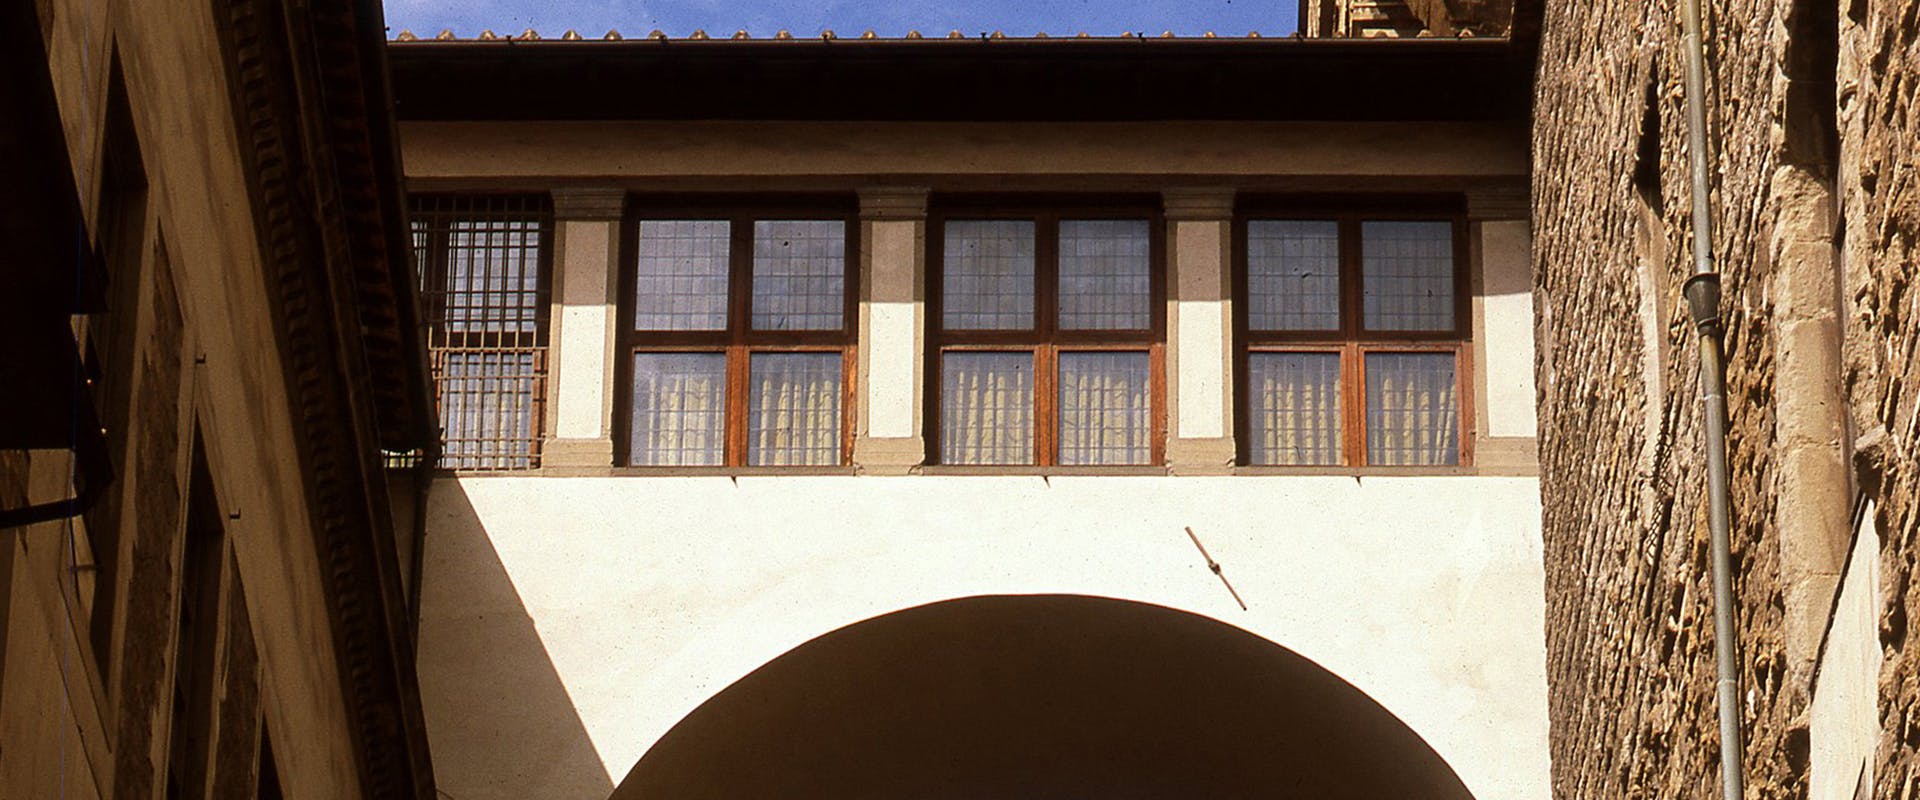 Passage from Palazzo Vecchio to the Uffizi temporarily closed due to maintenance works